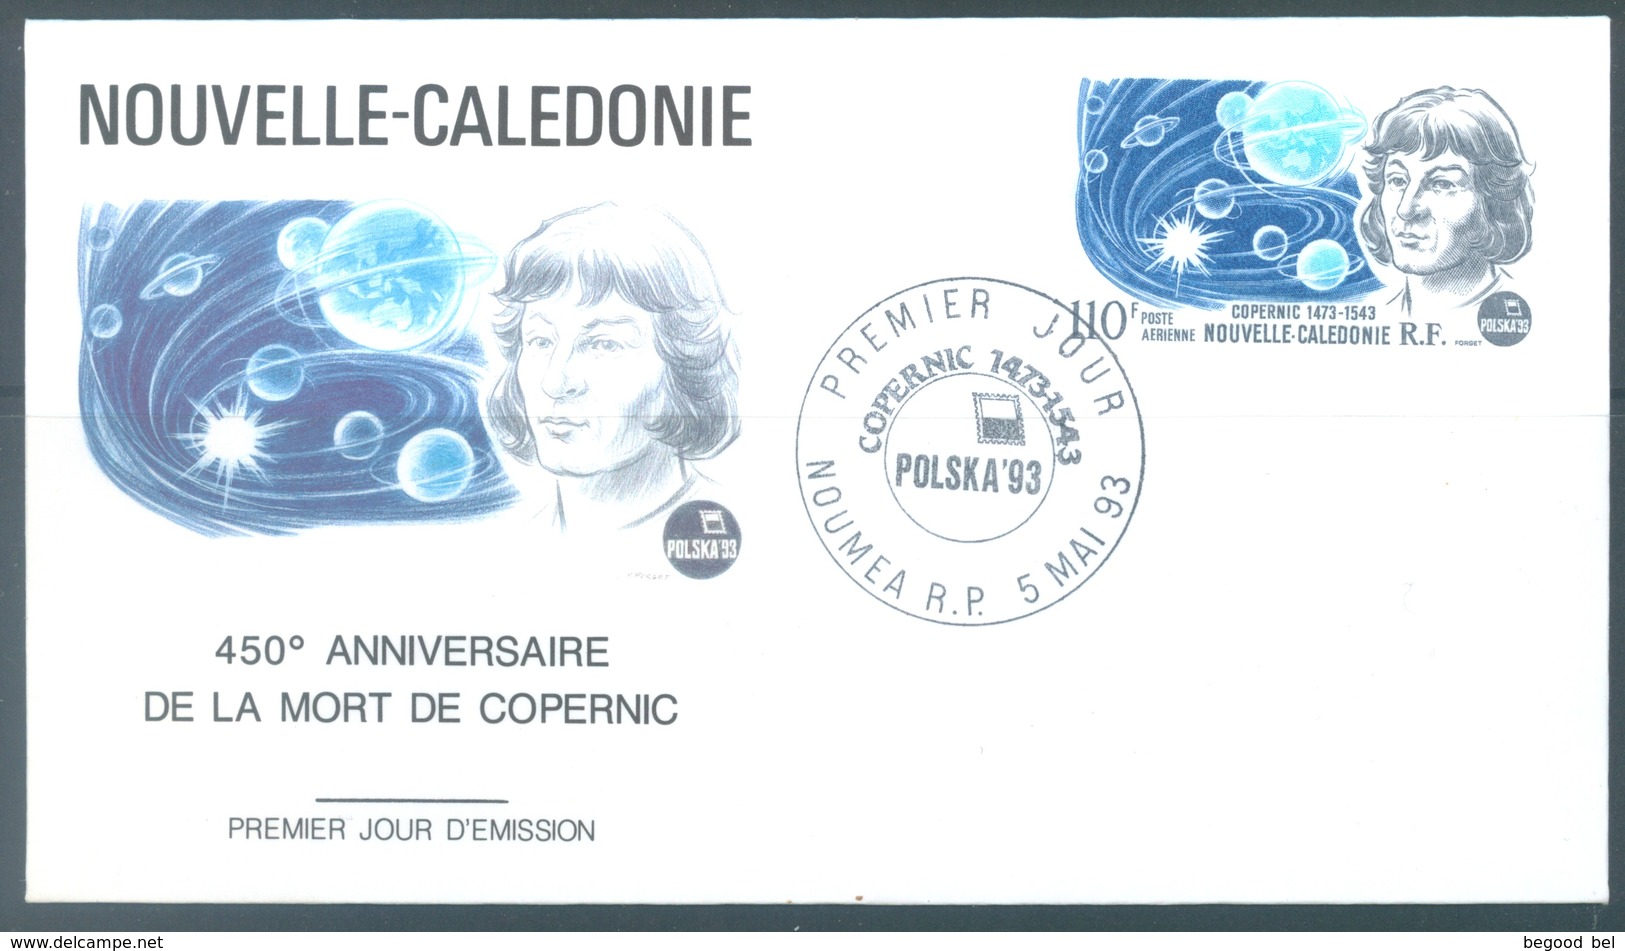 NOUVELLE CALEDONIE - 5.5.1993 - FDC - COPERNIC - Yv  298 - Lot 17219 - FDC